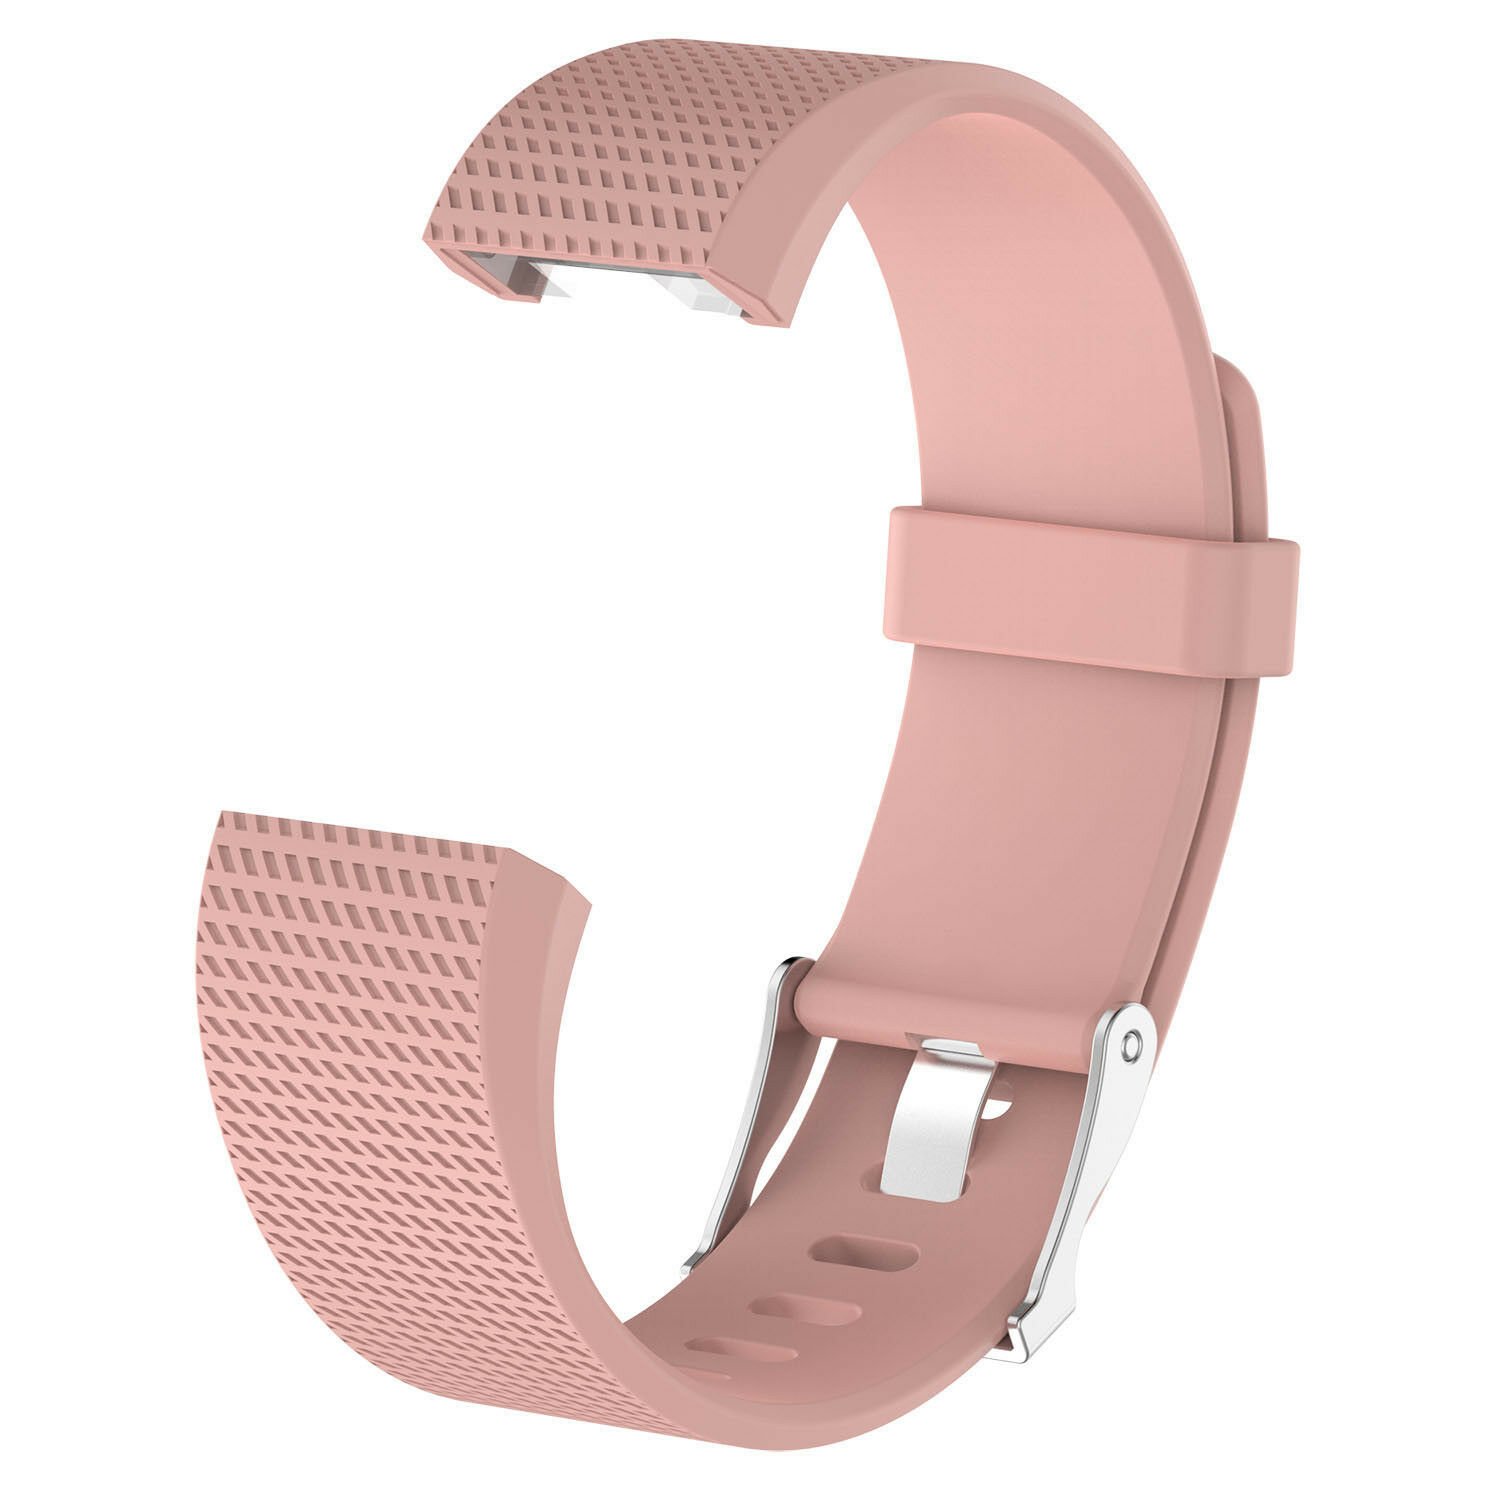 Replacement Silicone Classic Wrist Watch Band For Fitbit CHARGE 2 Strap ...